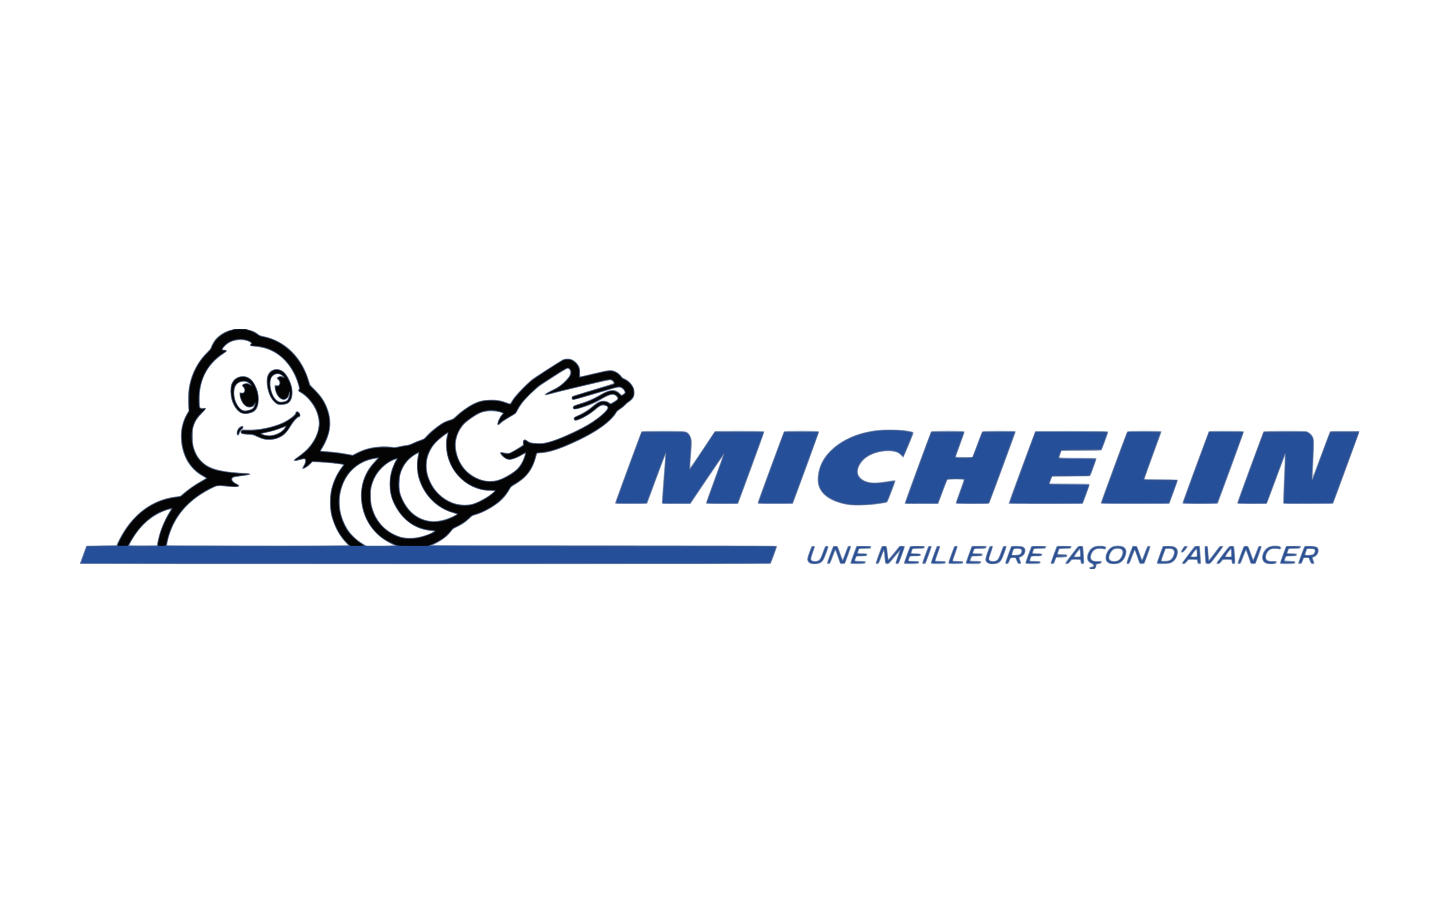 Guide Michelin Logo Stars & other symbols a guide to the Michelin